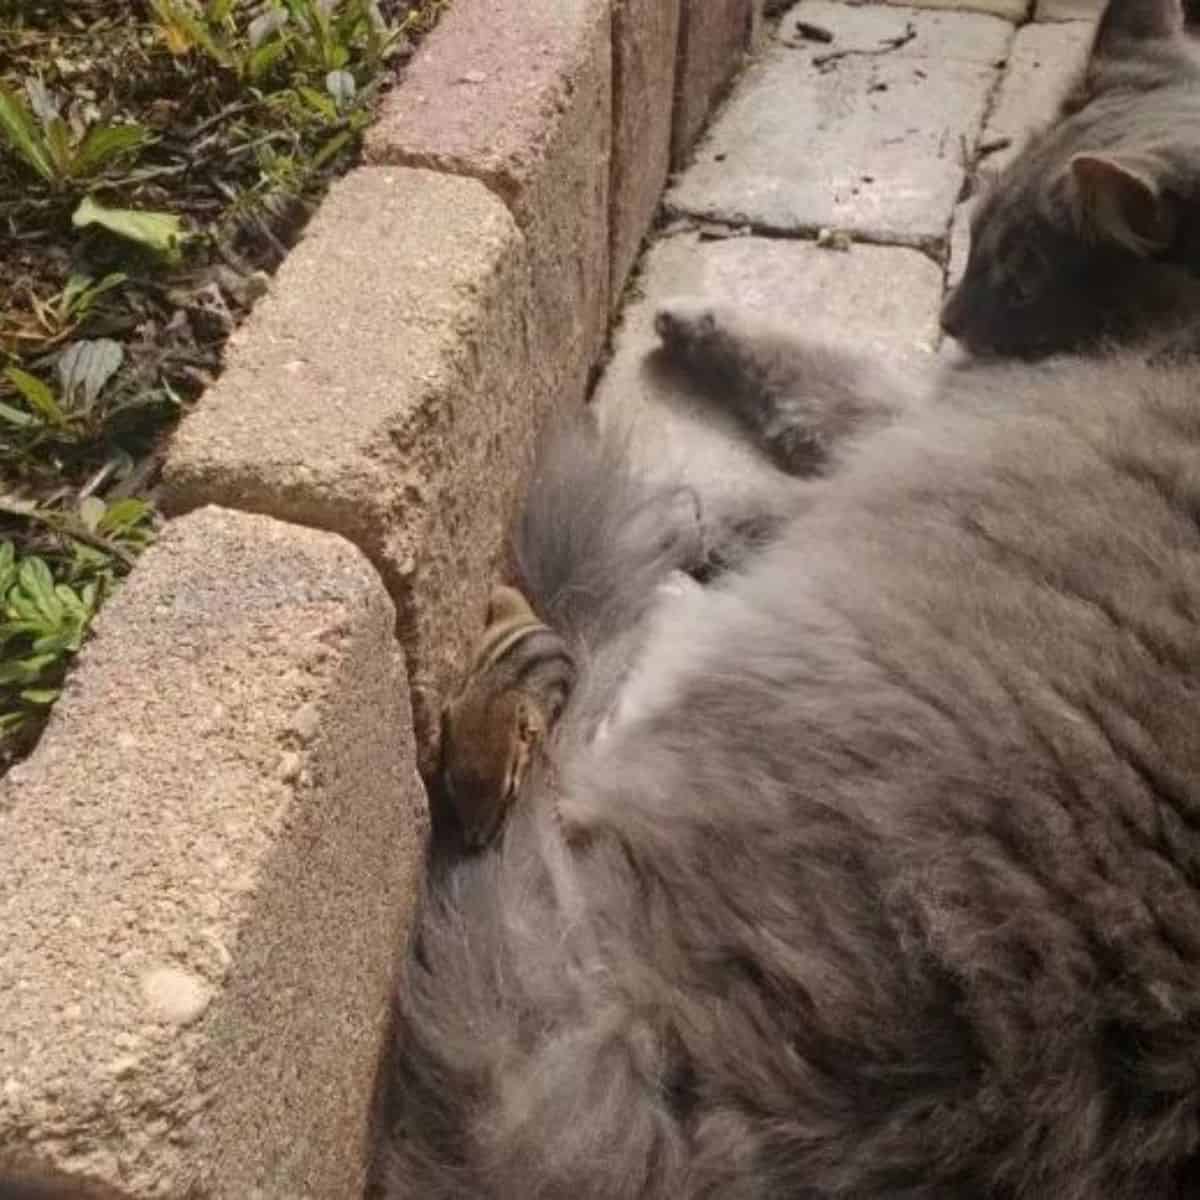 the squirrel sits by the sidewalk and next to the cat